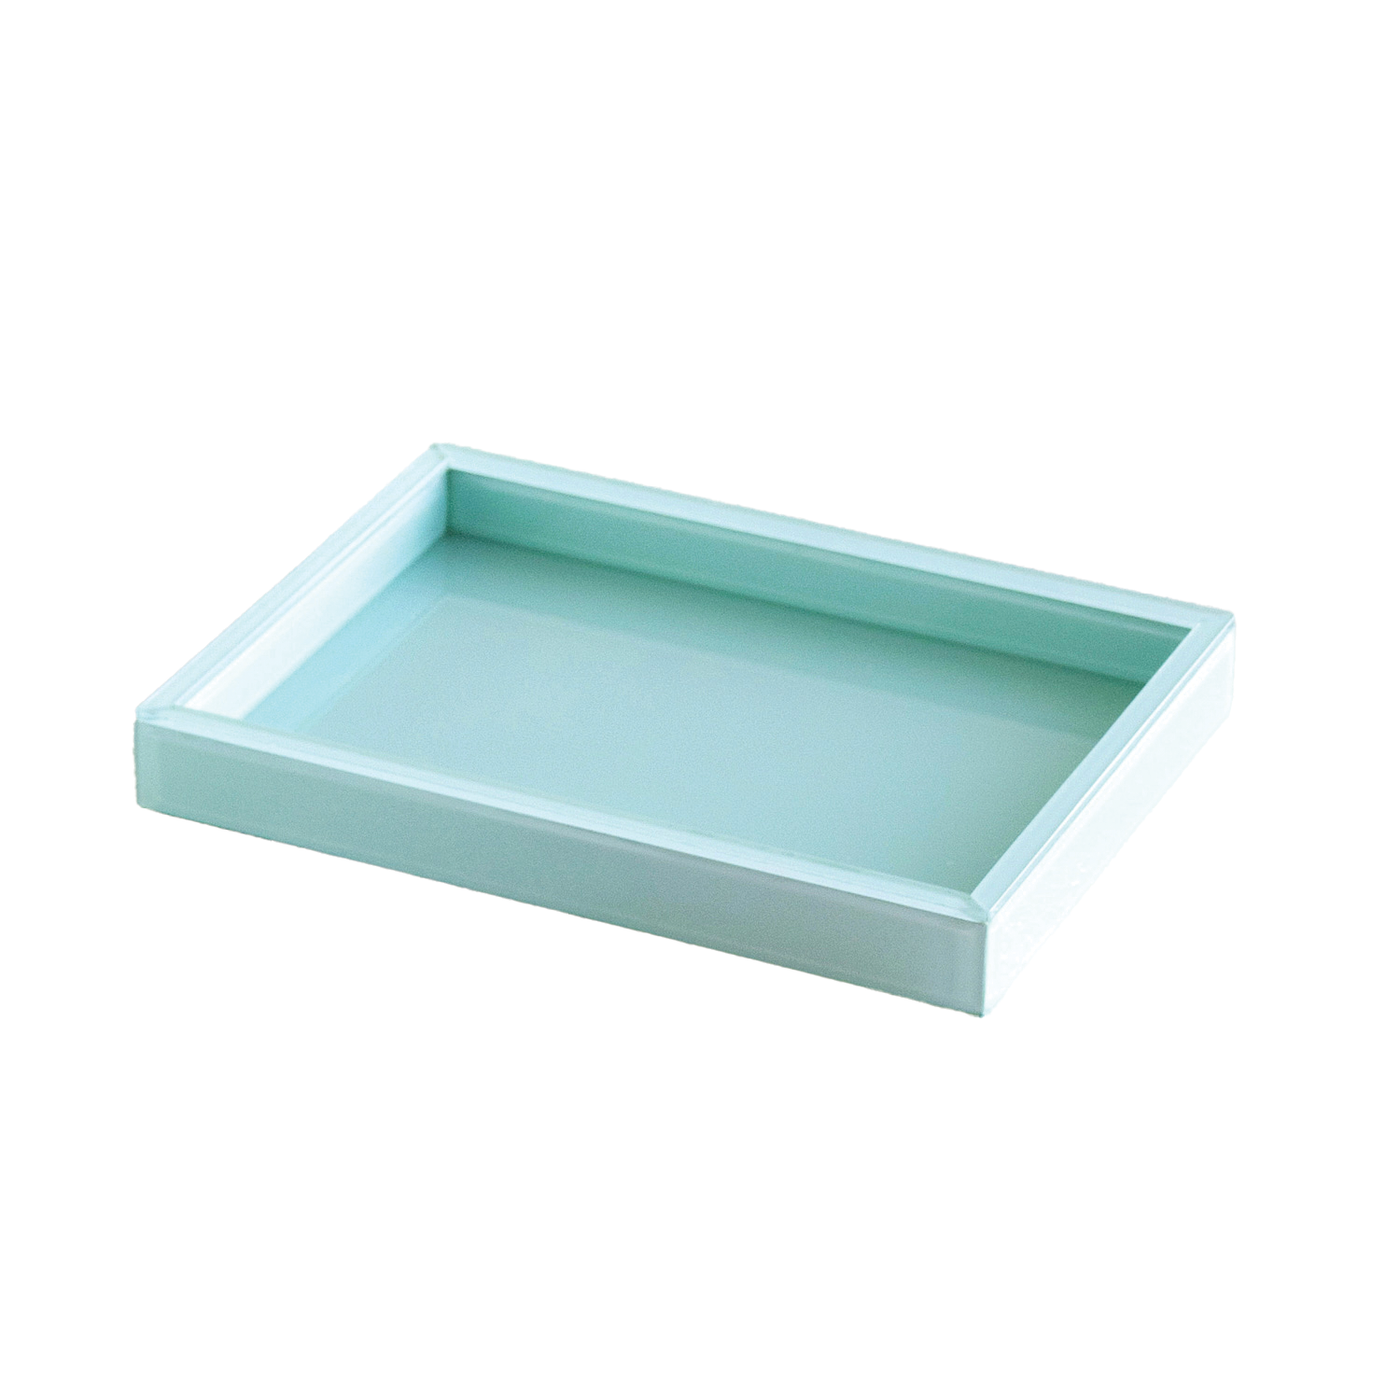 Glass Tray - Turquoise